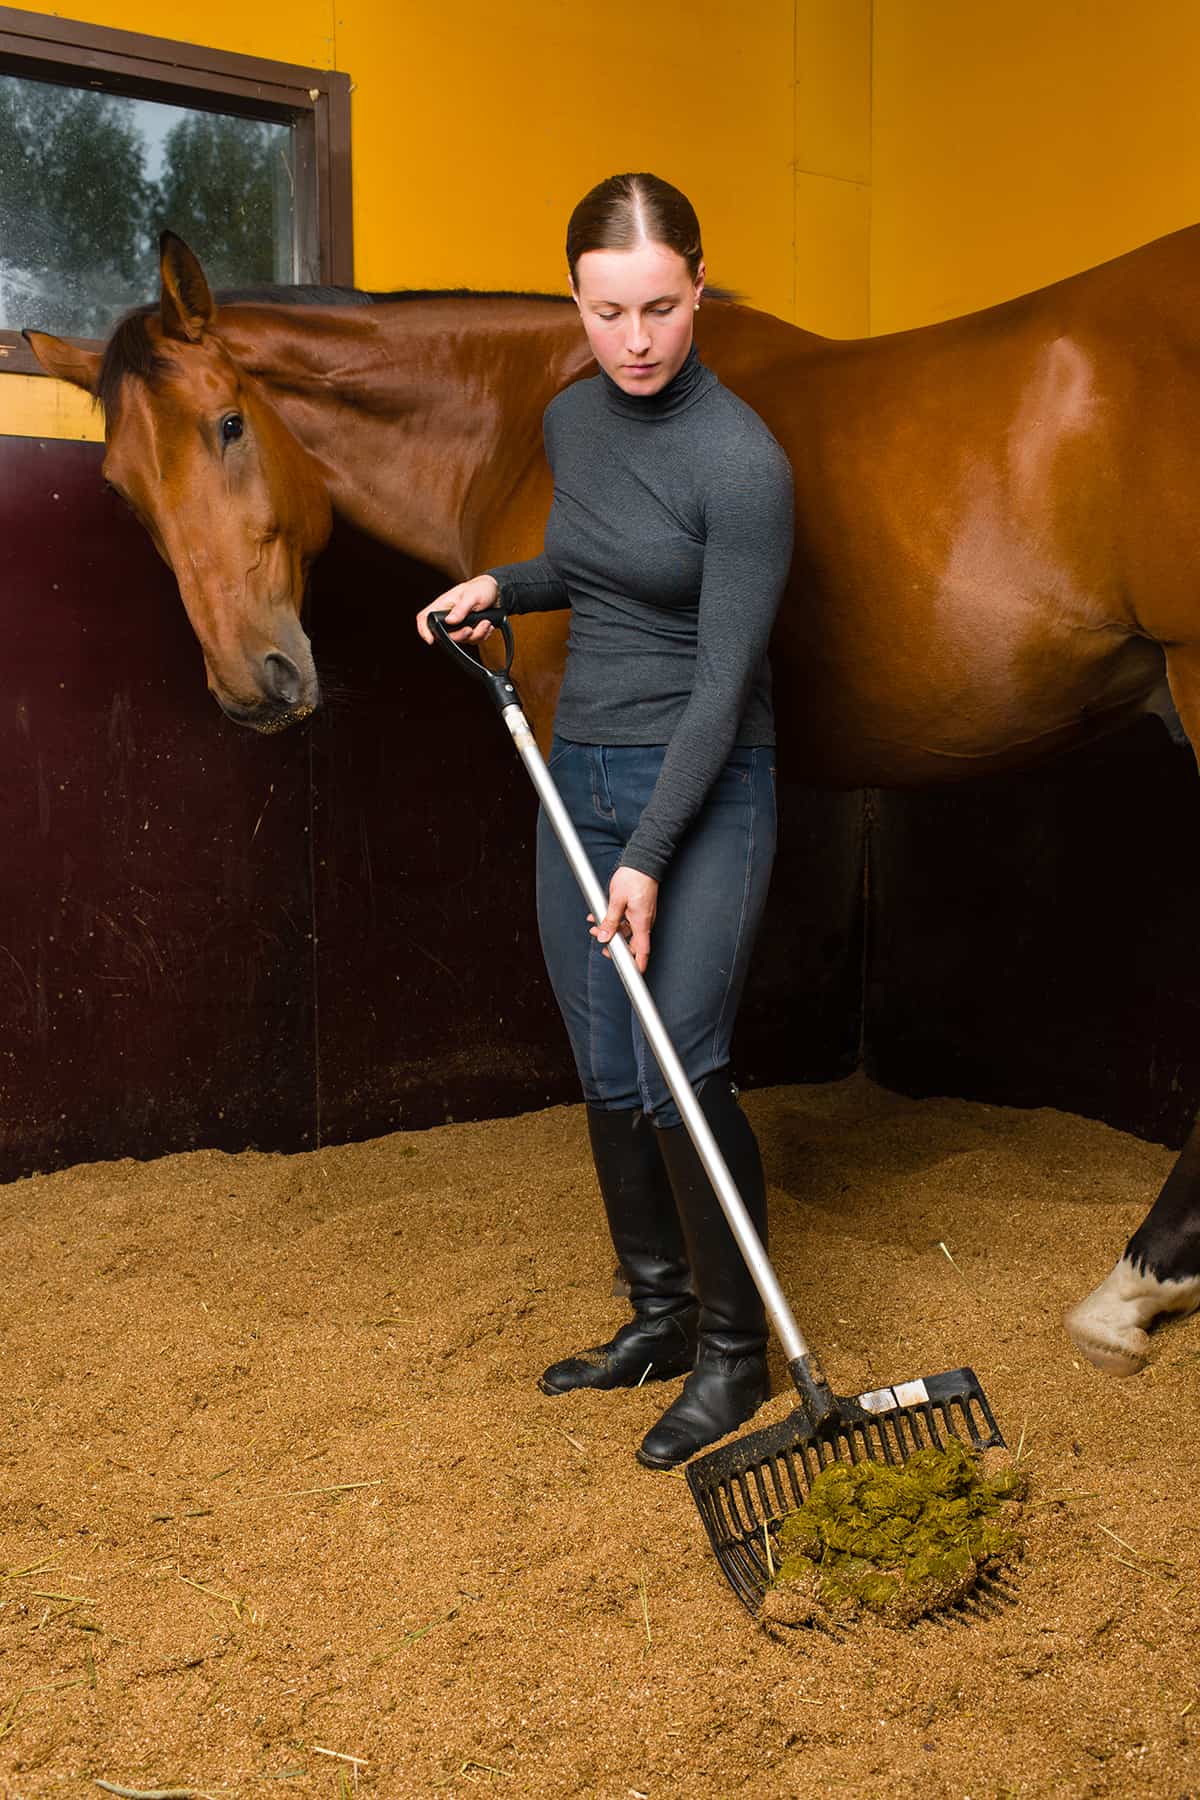 How Often Should I Clean a Horse Stall